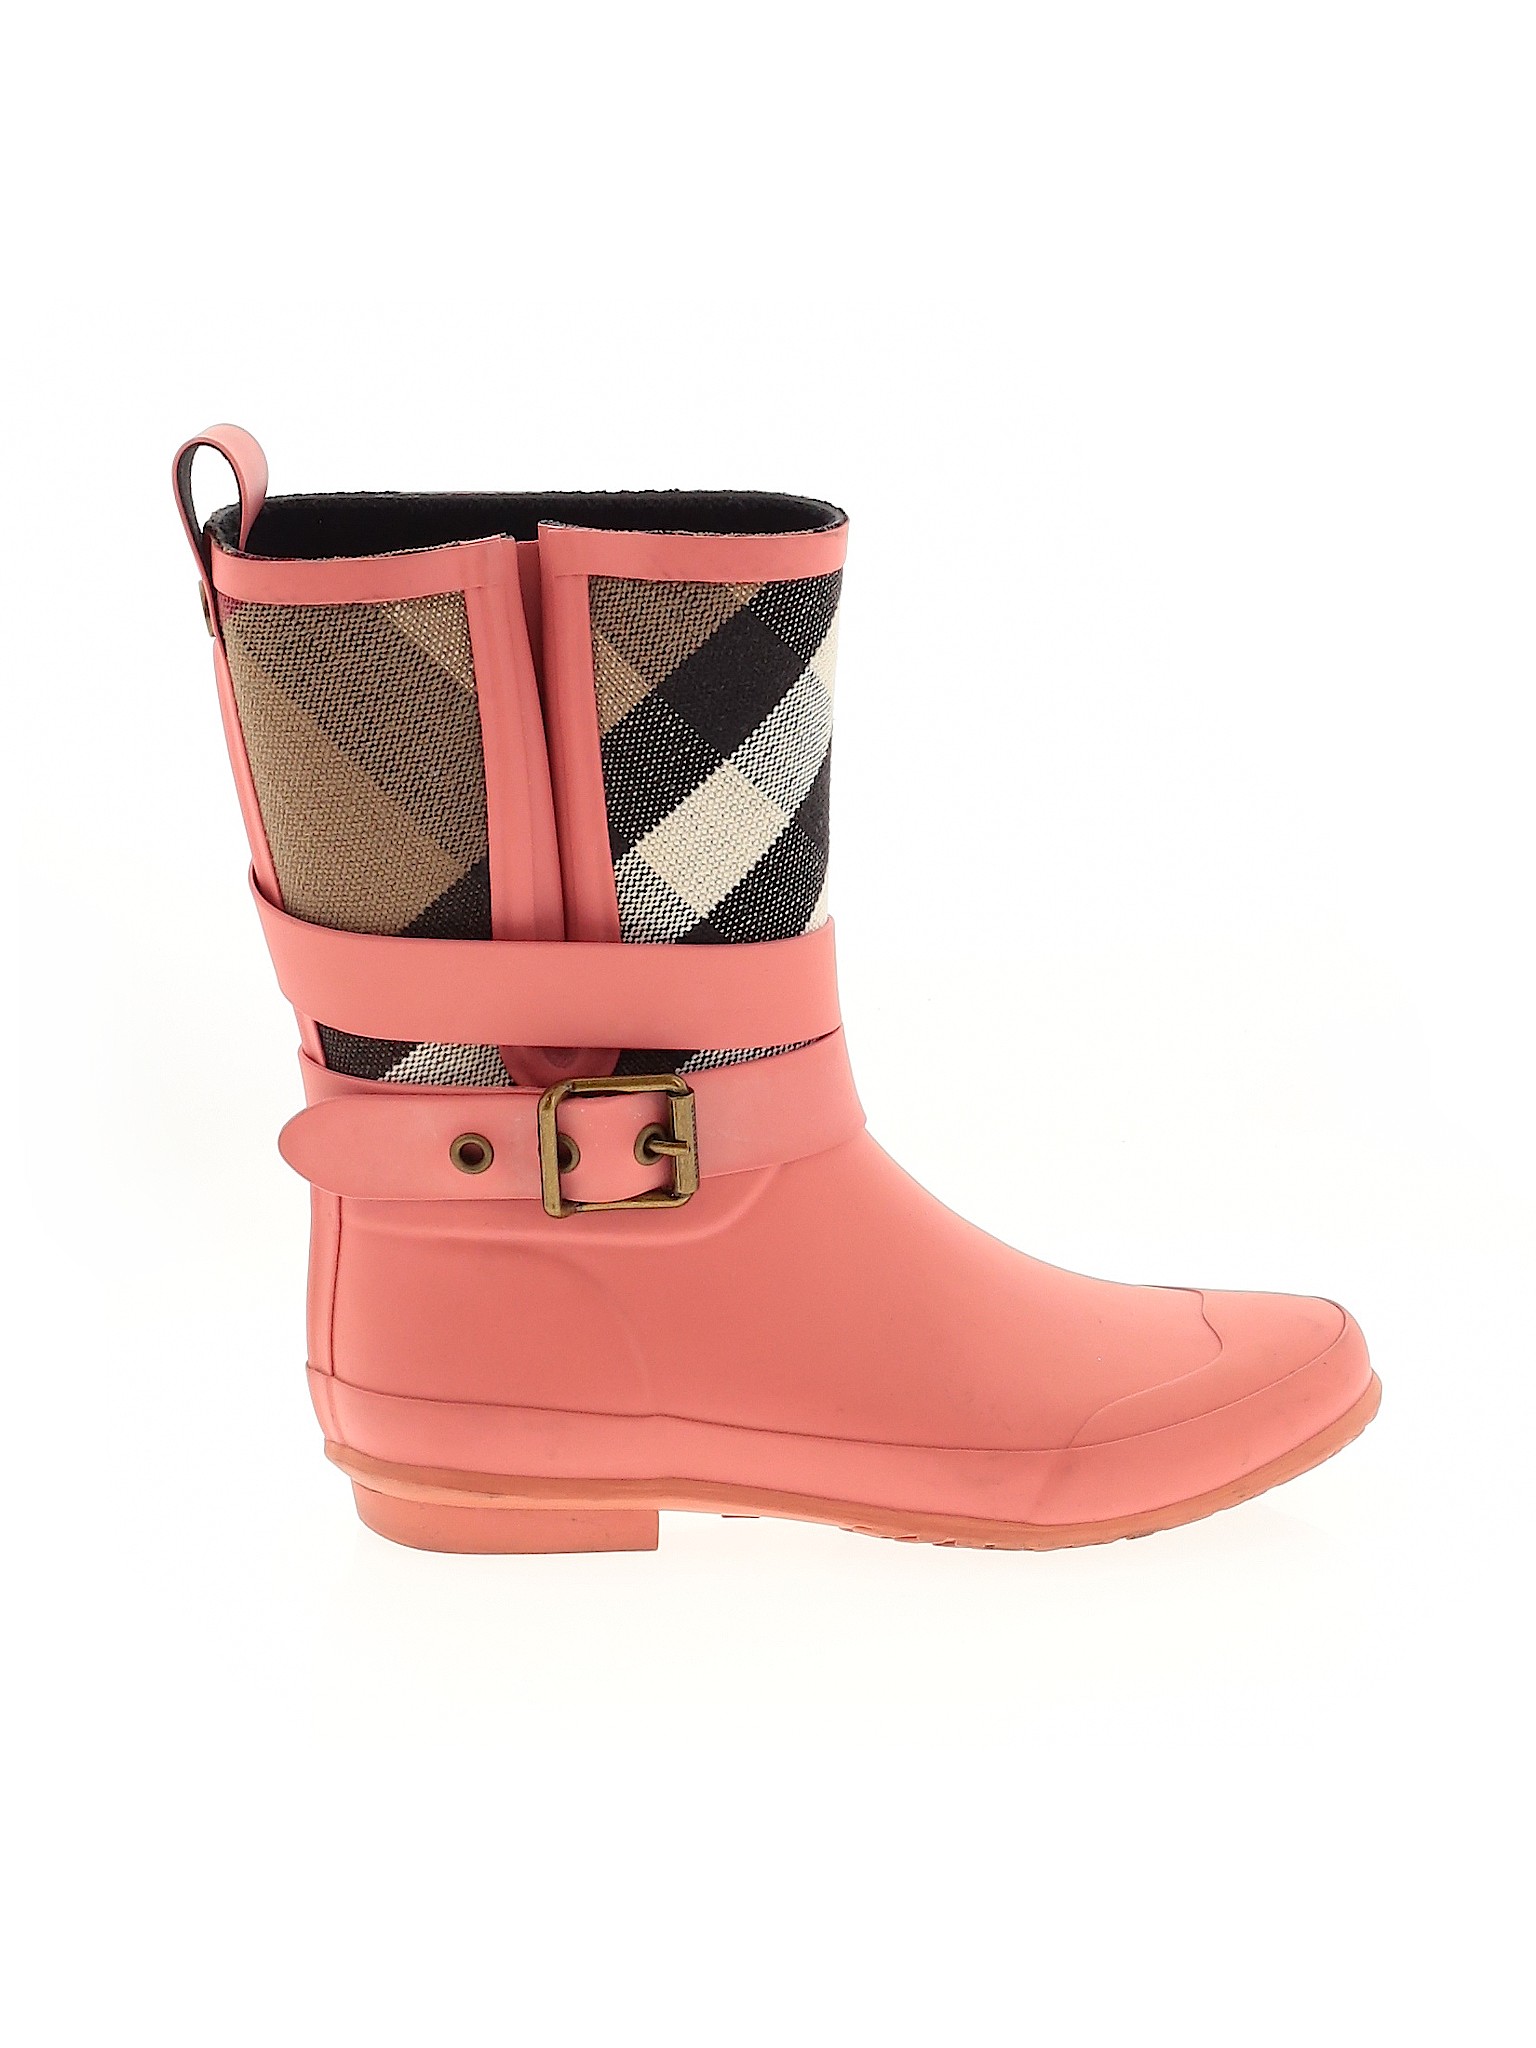 burberry boots pink